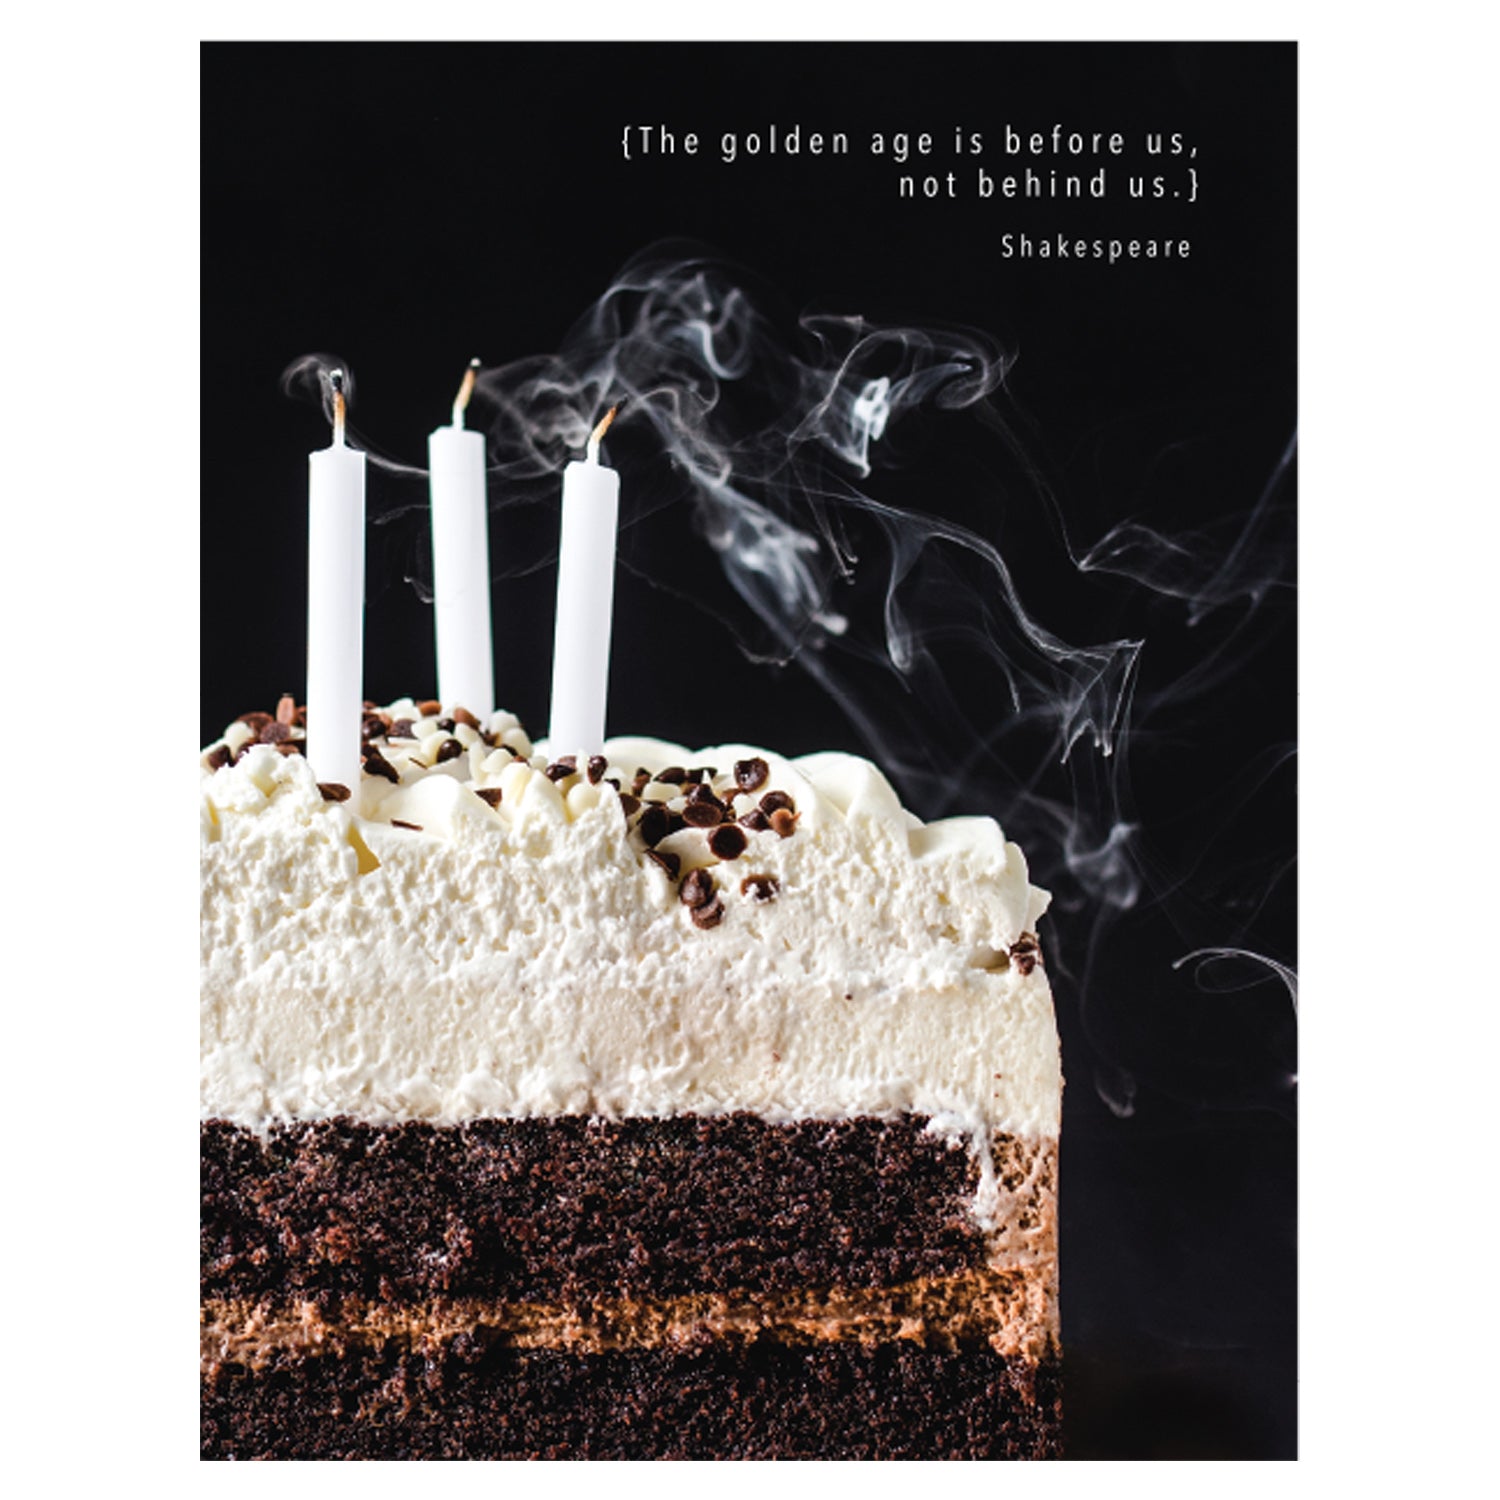 An original Golden Age Card cake with candles on it and a Shakespeare quote, by Hester &amp; Cook.